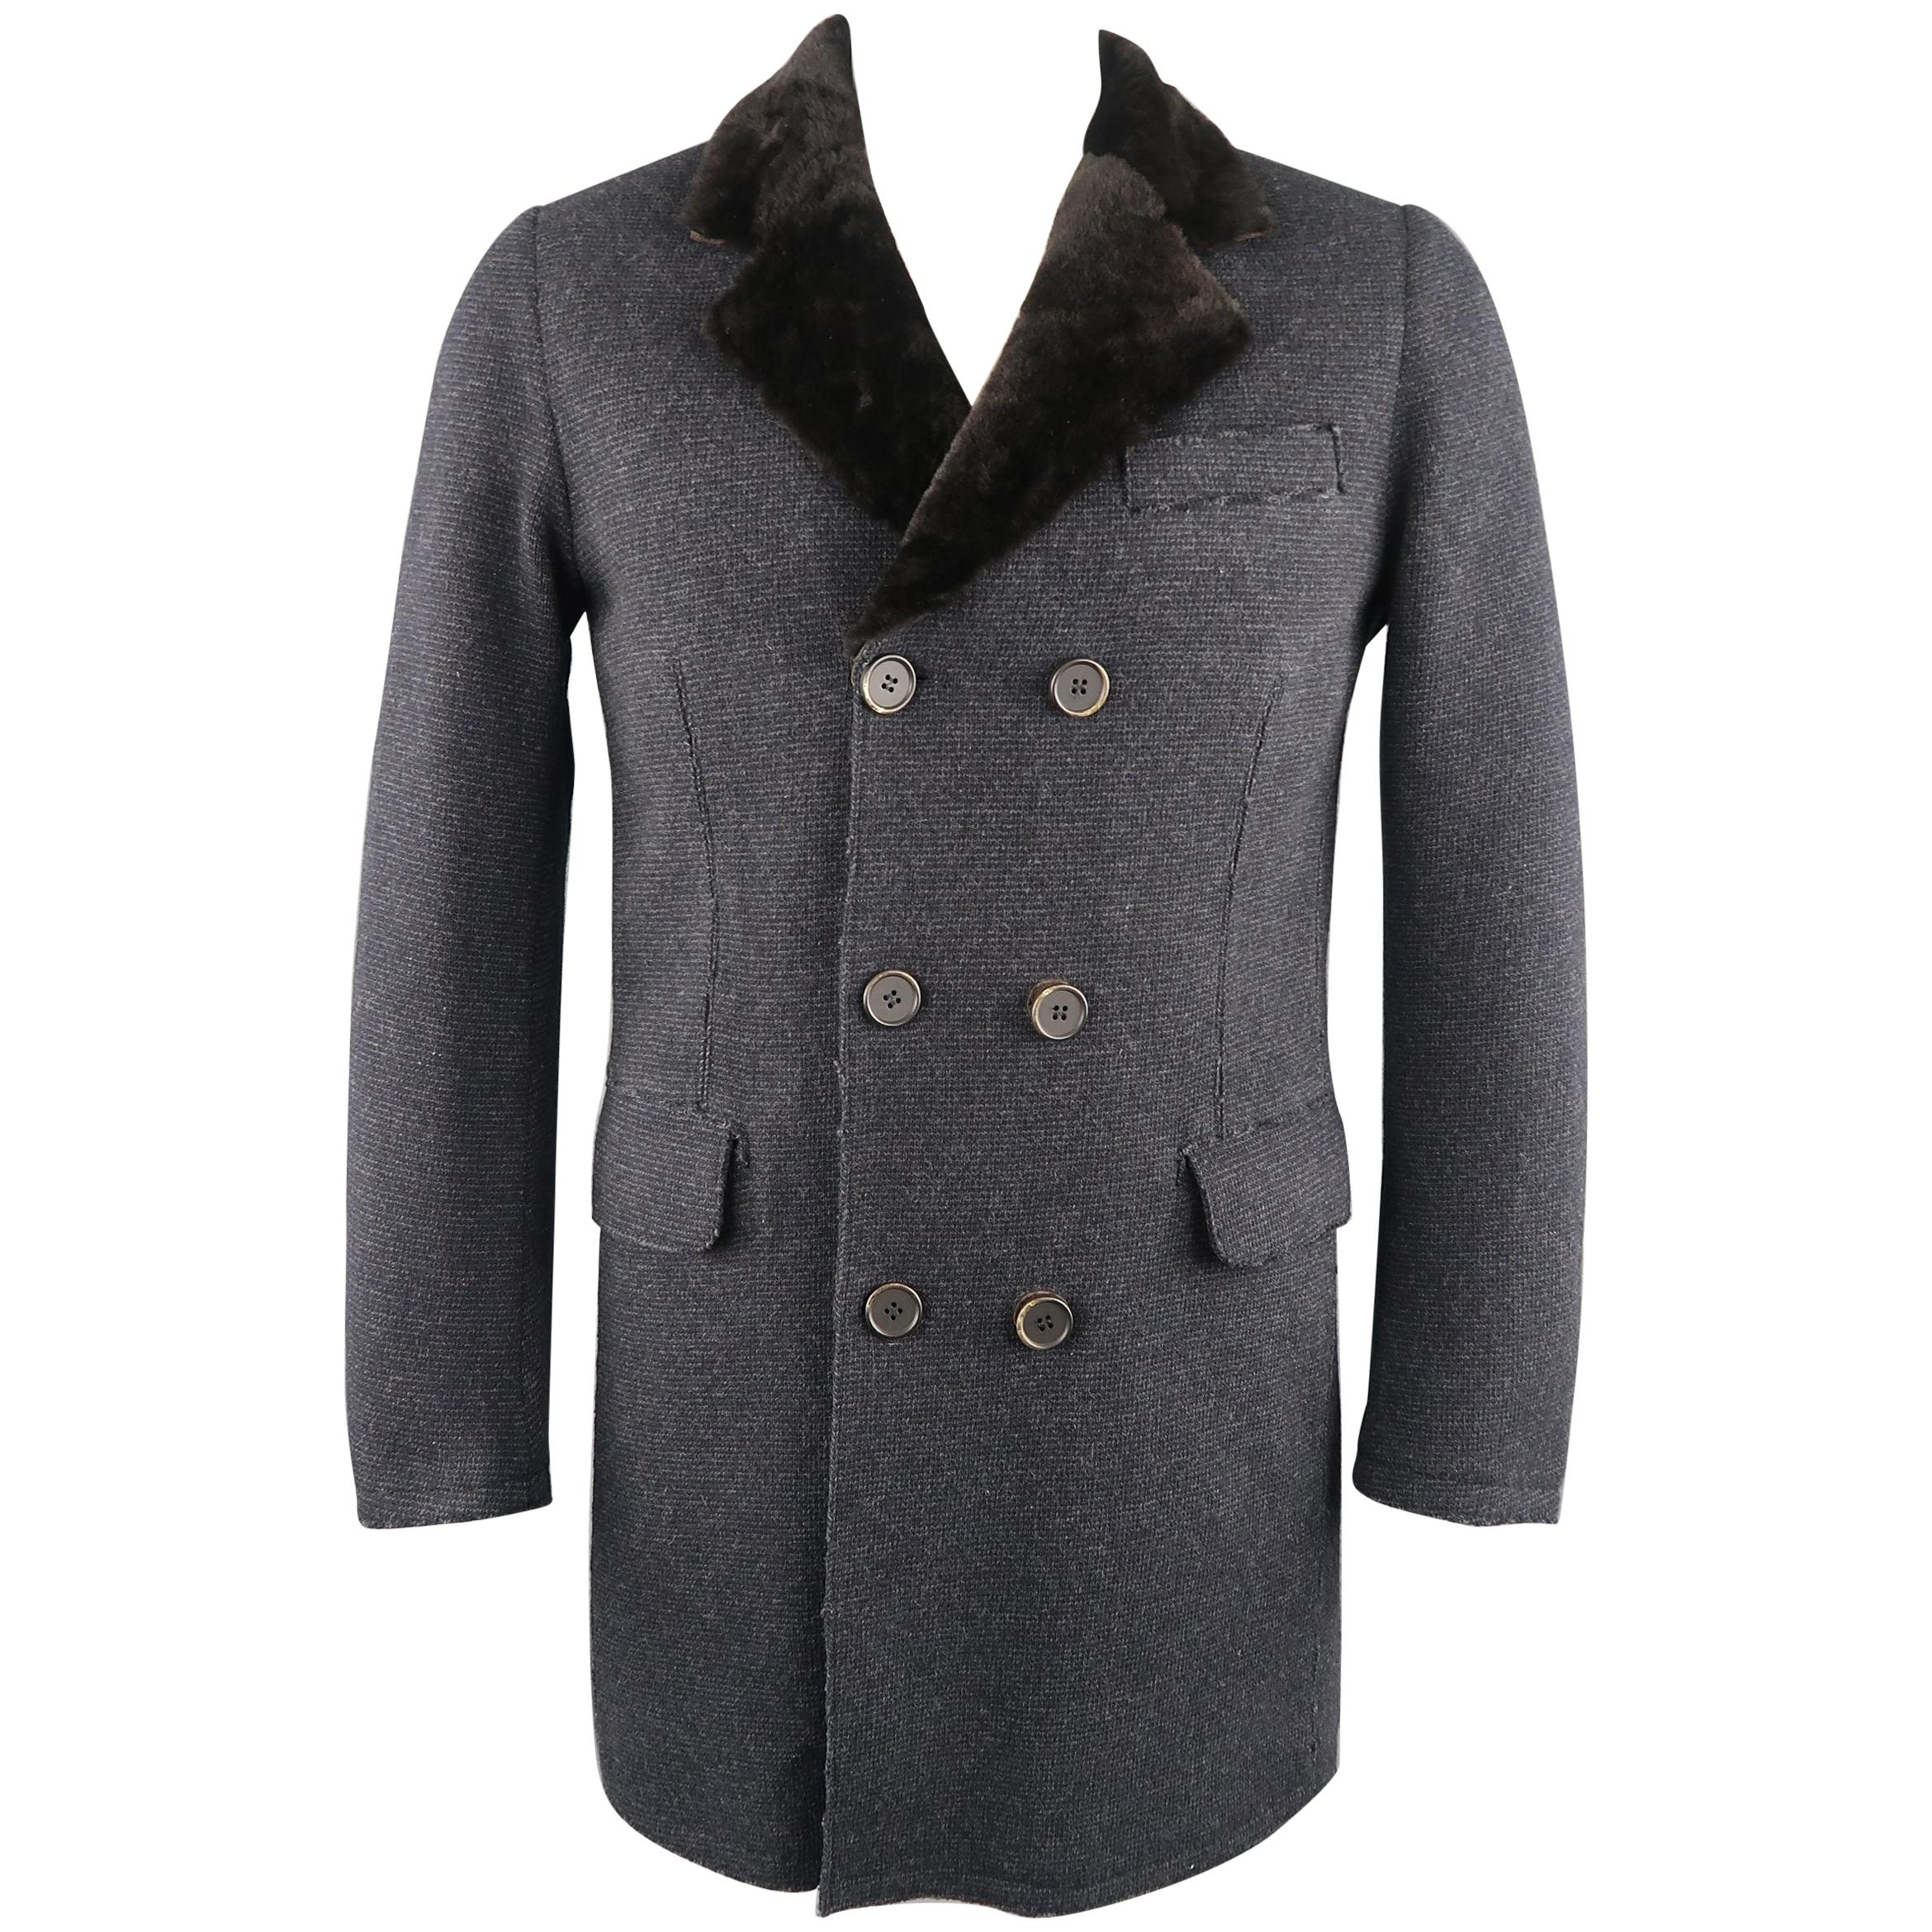 GMS-75 S Navy Heather Wool Blend Shearling Collar Double Breasted Coat